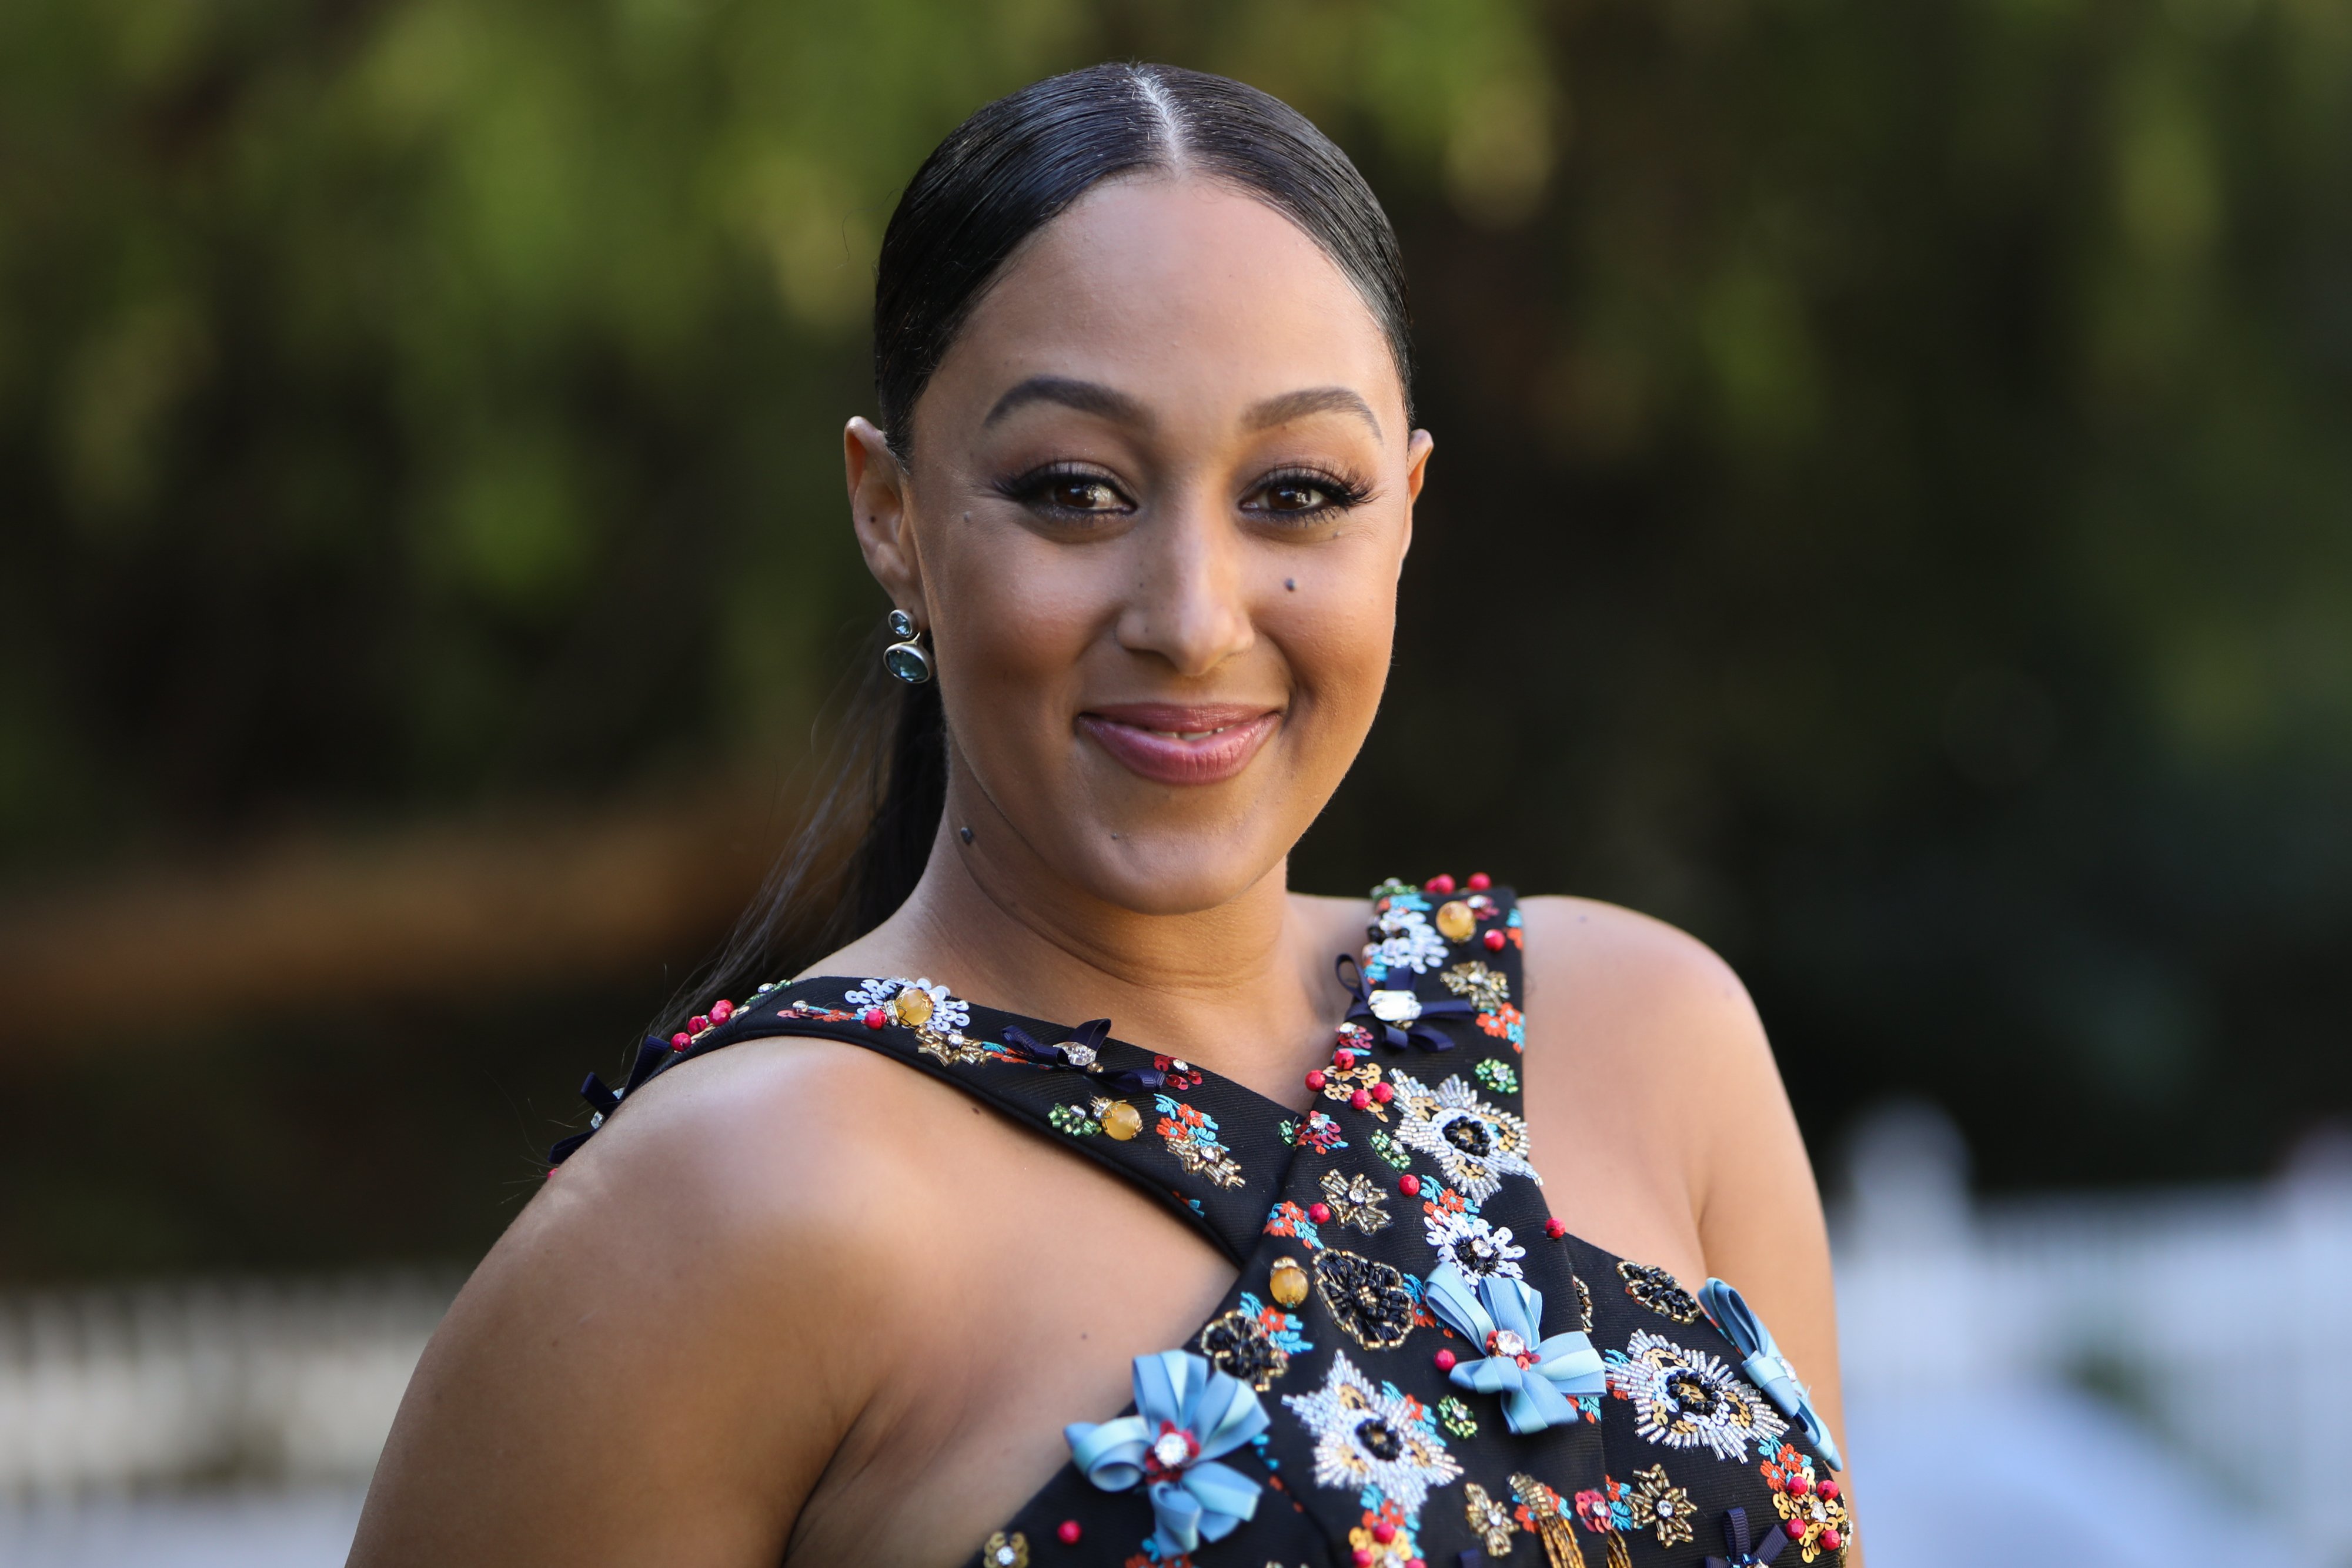 Tamera Mowry-Housley pictured at Universal Studios Hollywood on November 07, 2019 in Universal City, California. | Source: Getty Images